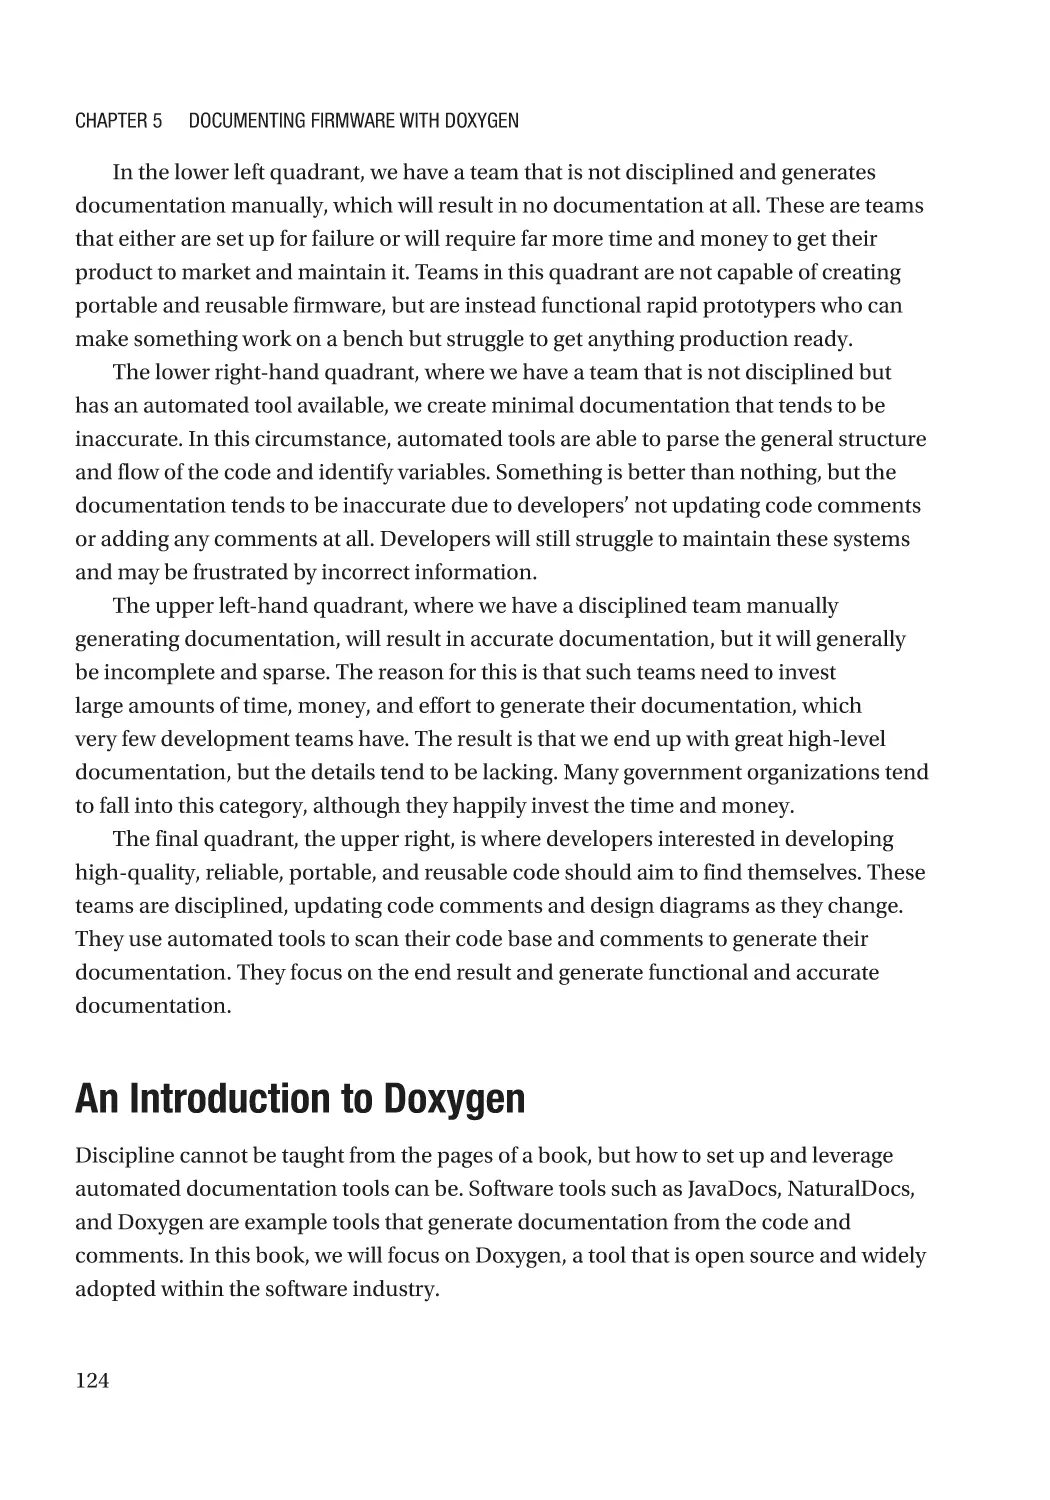 An Introduction to Doxygen